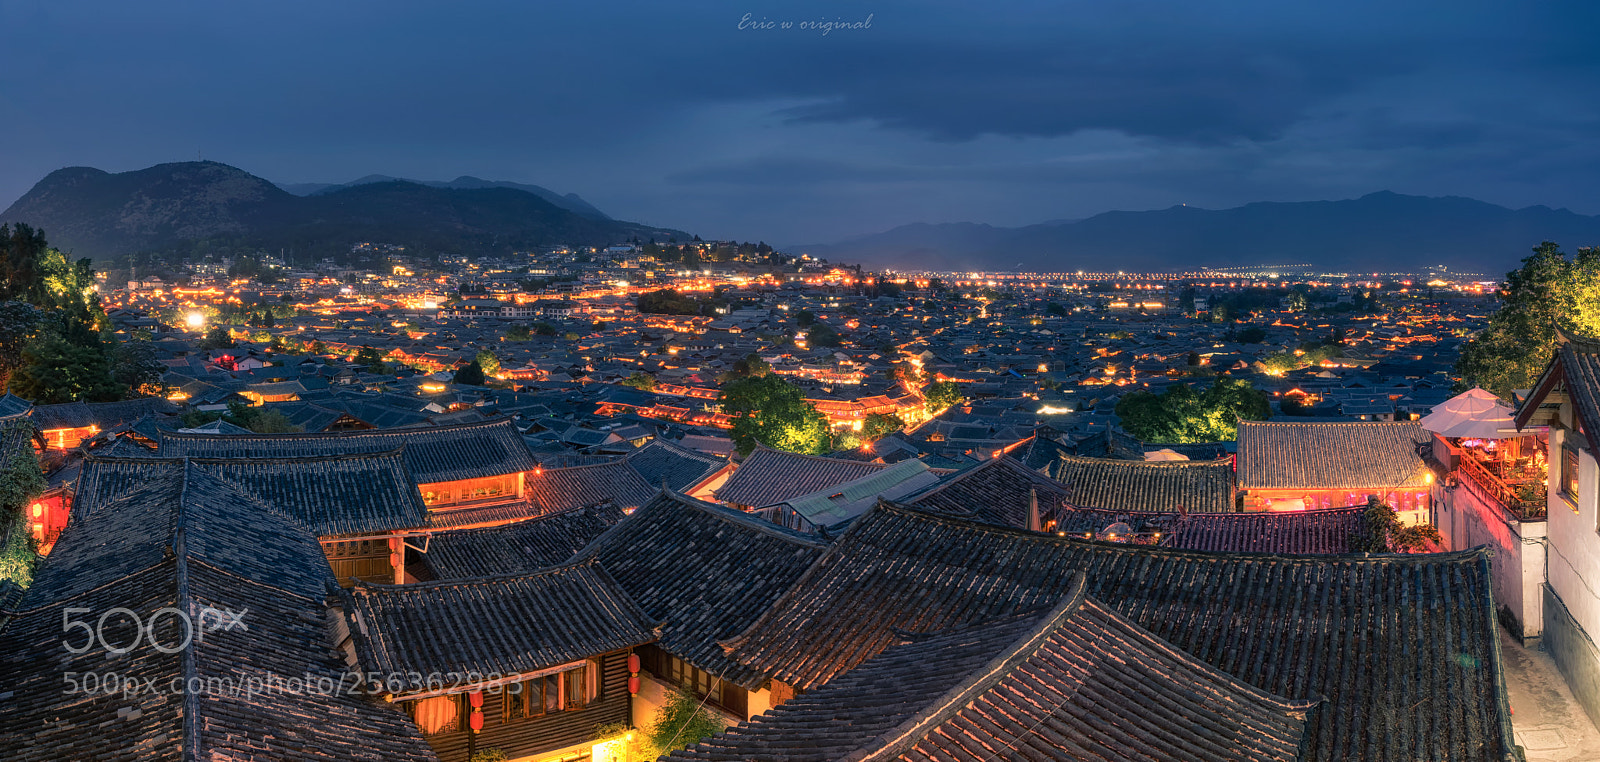 Sony a7R II sample photo. Old town of lijiang photography